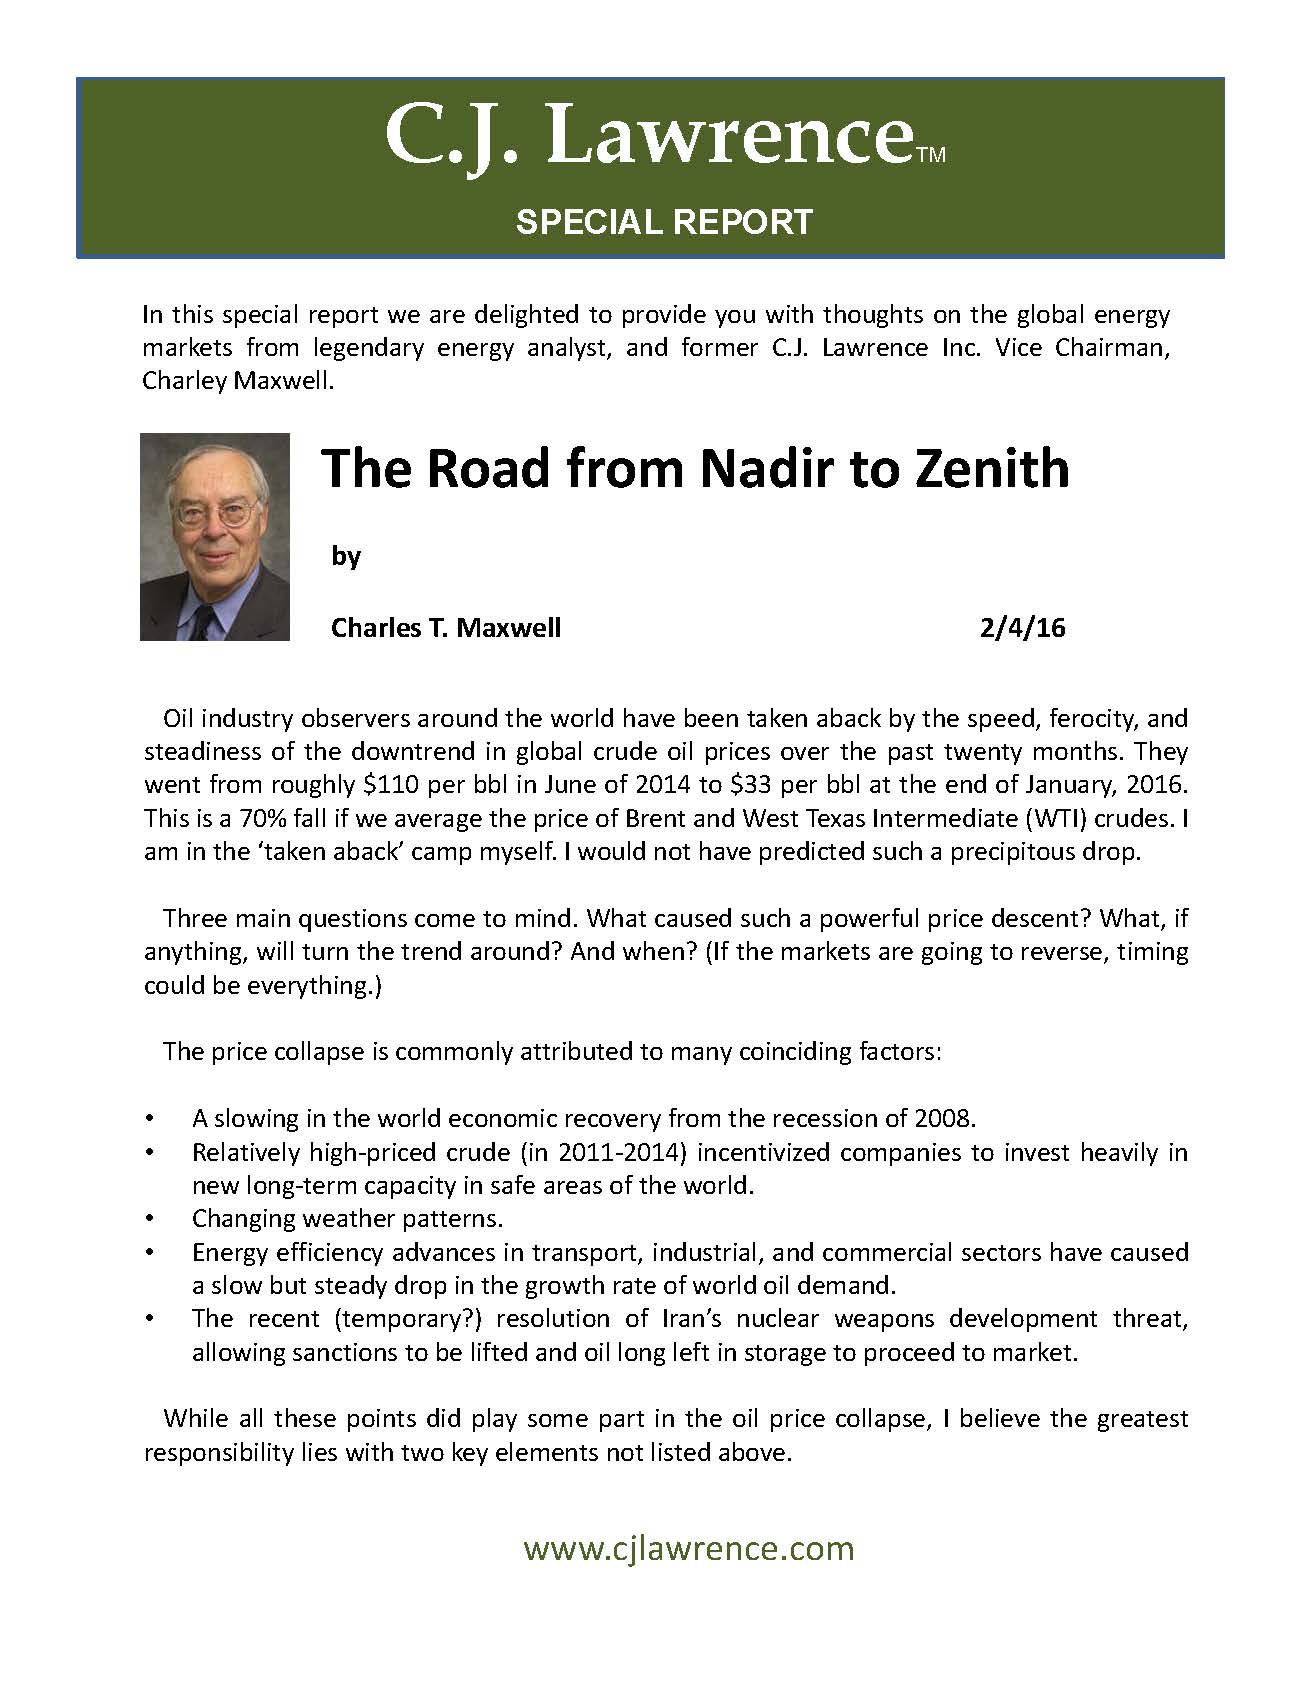 The Road from Nadir to Zenith